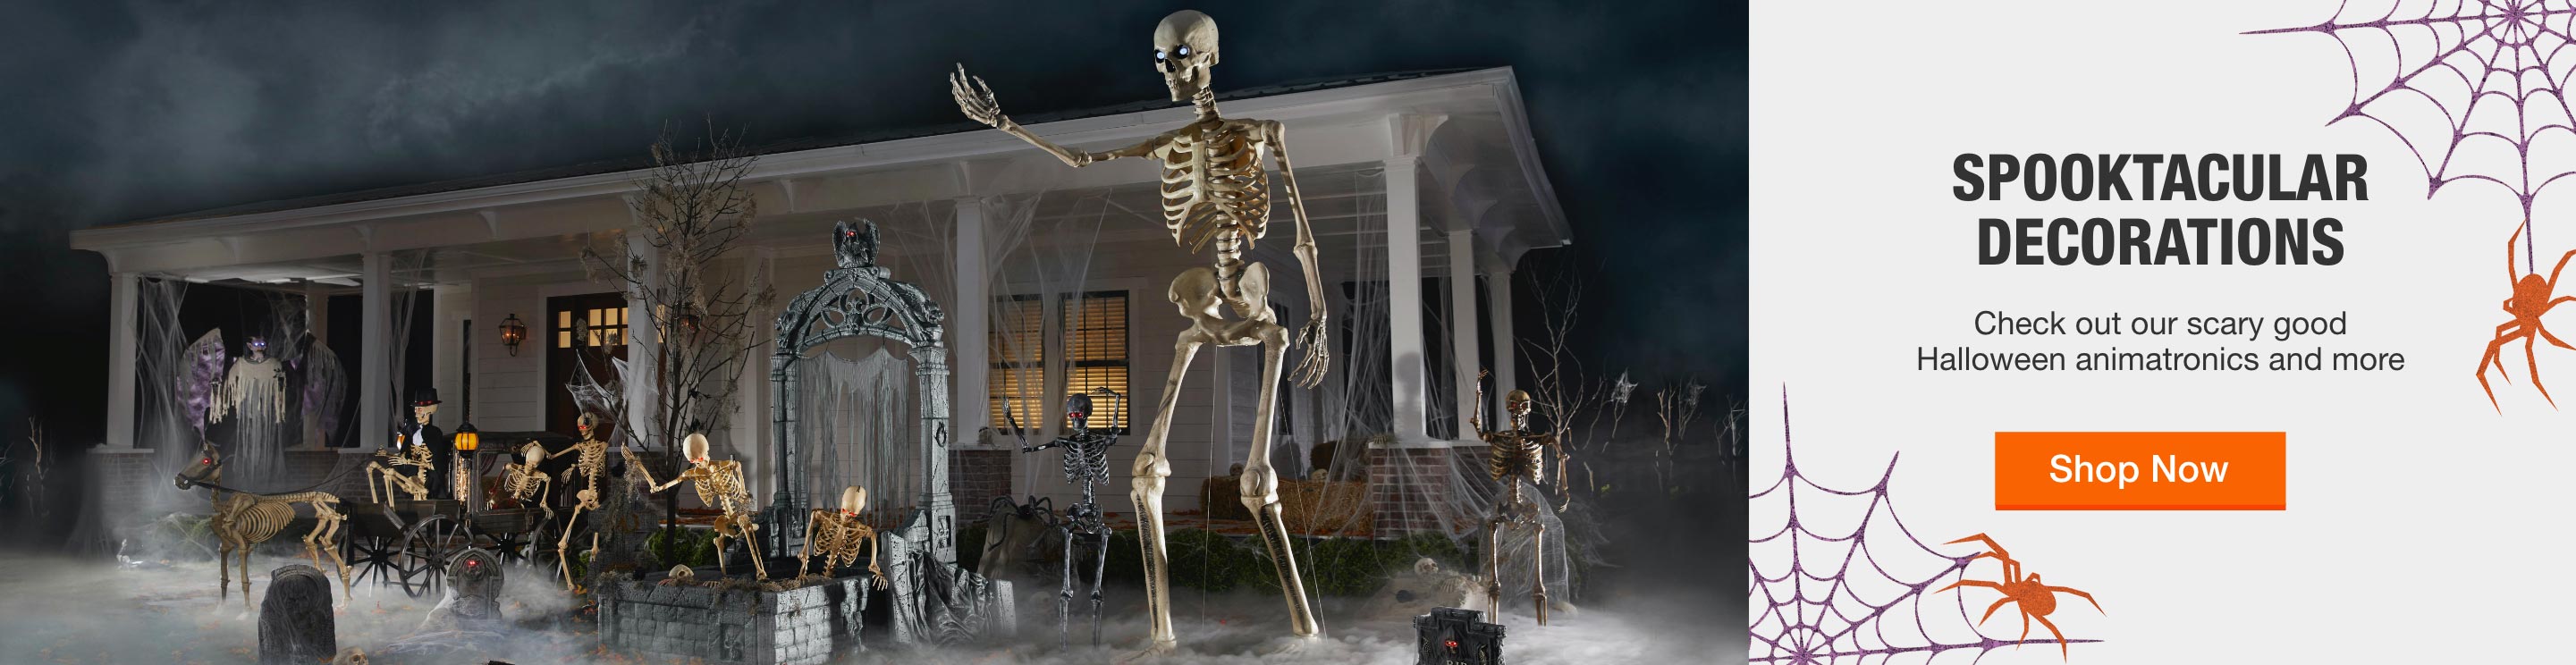 Halloween Decorations The Home Depot,Contact Joanna Gaines